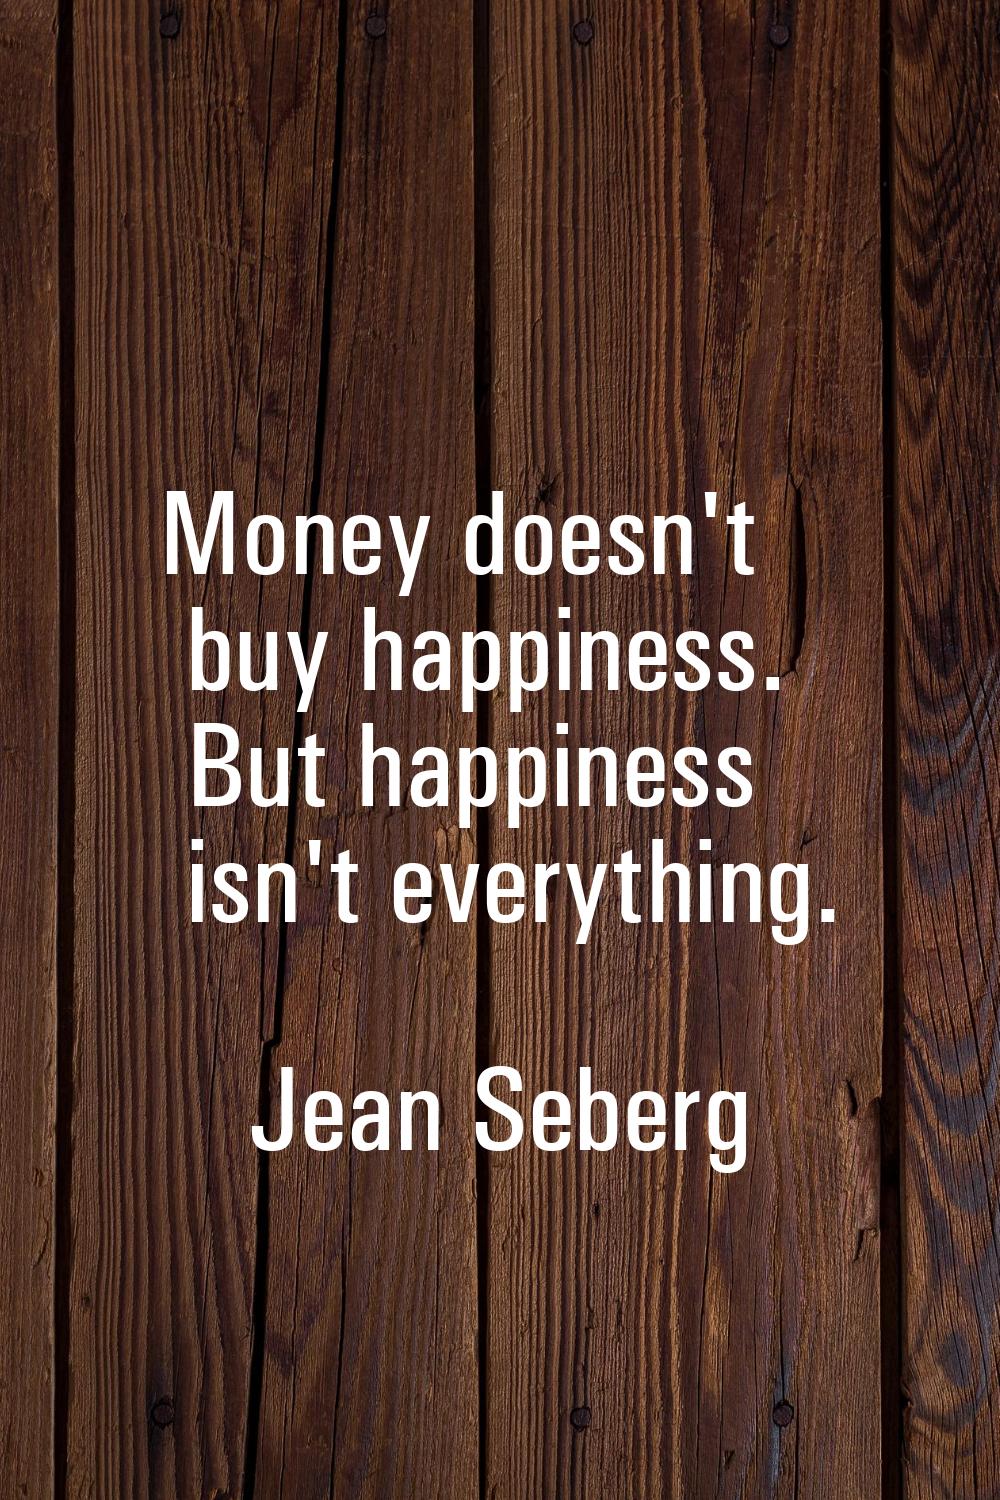 Money doesn't buy happiness. But happiness isn't everything.